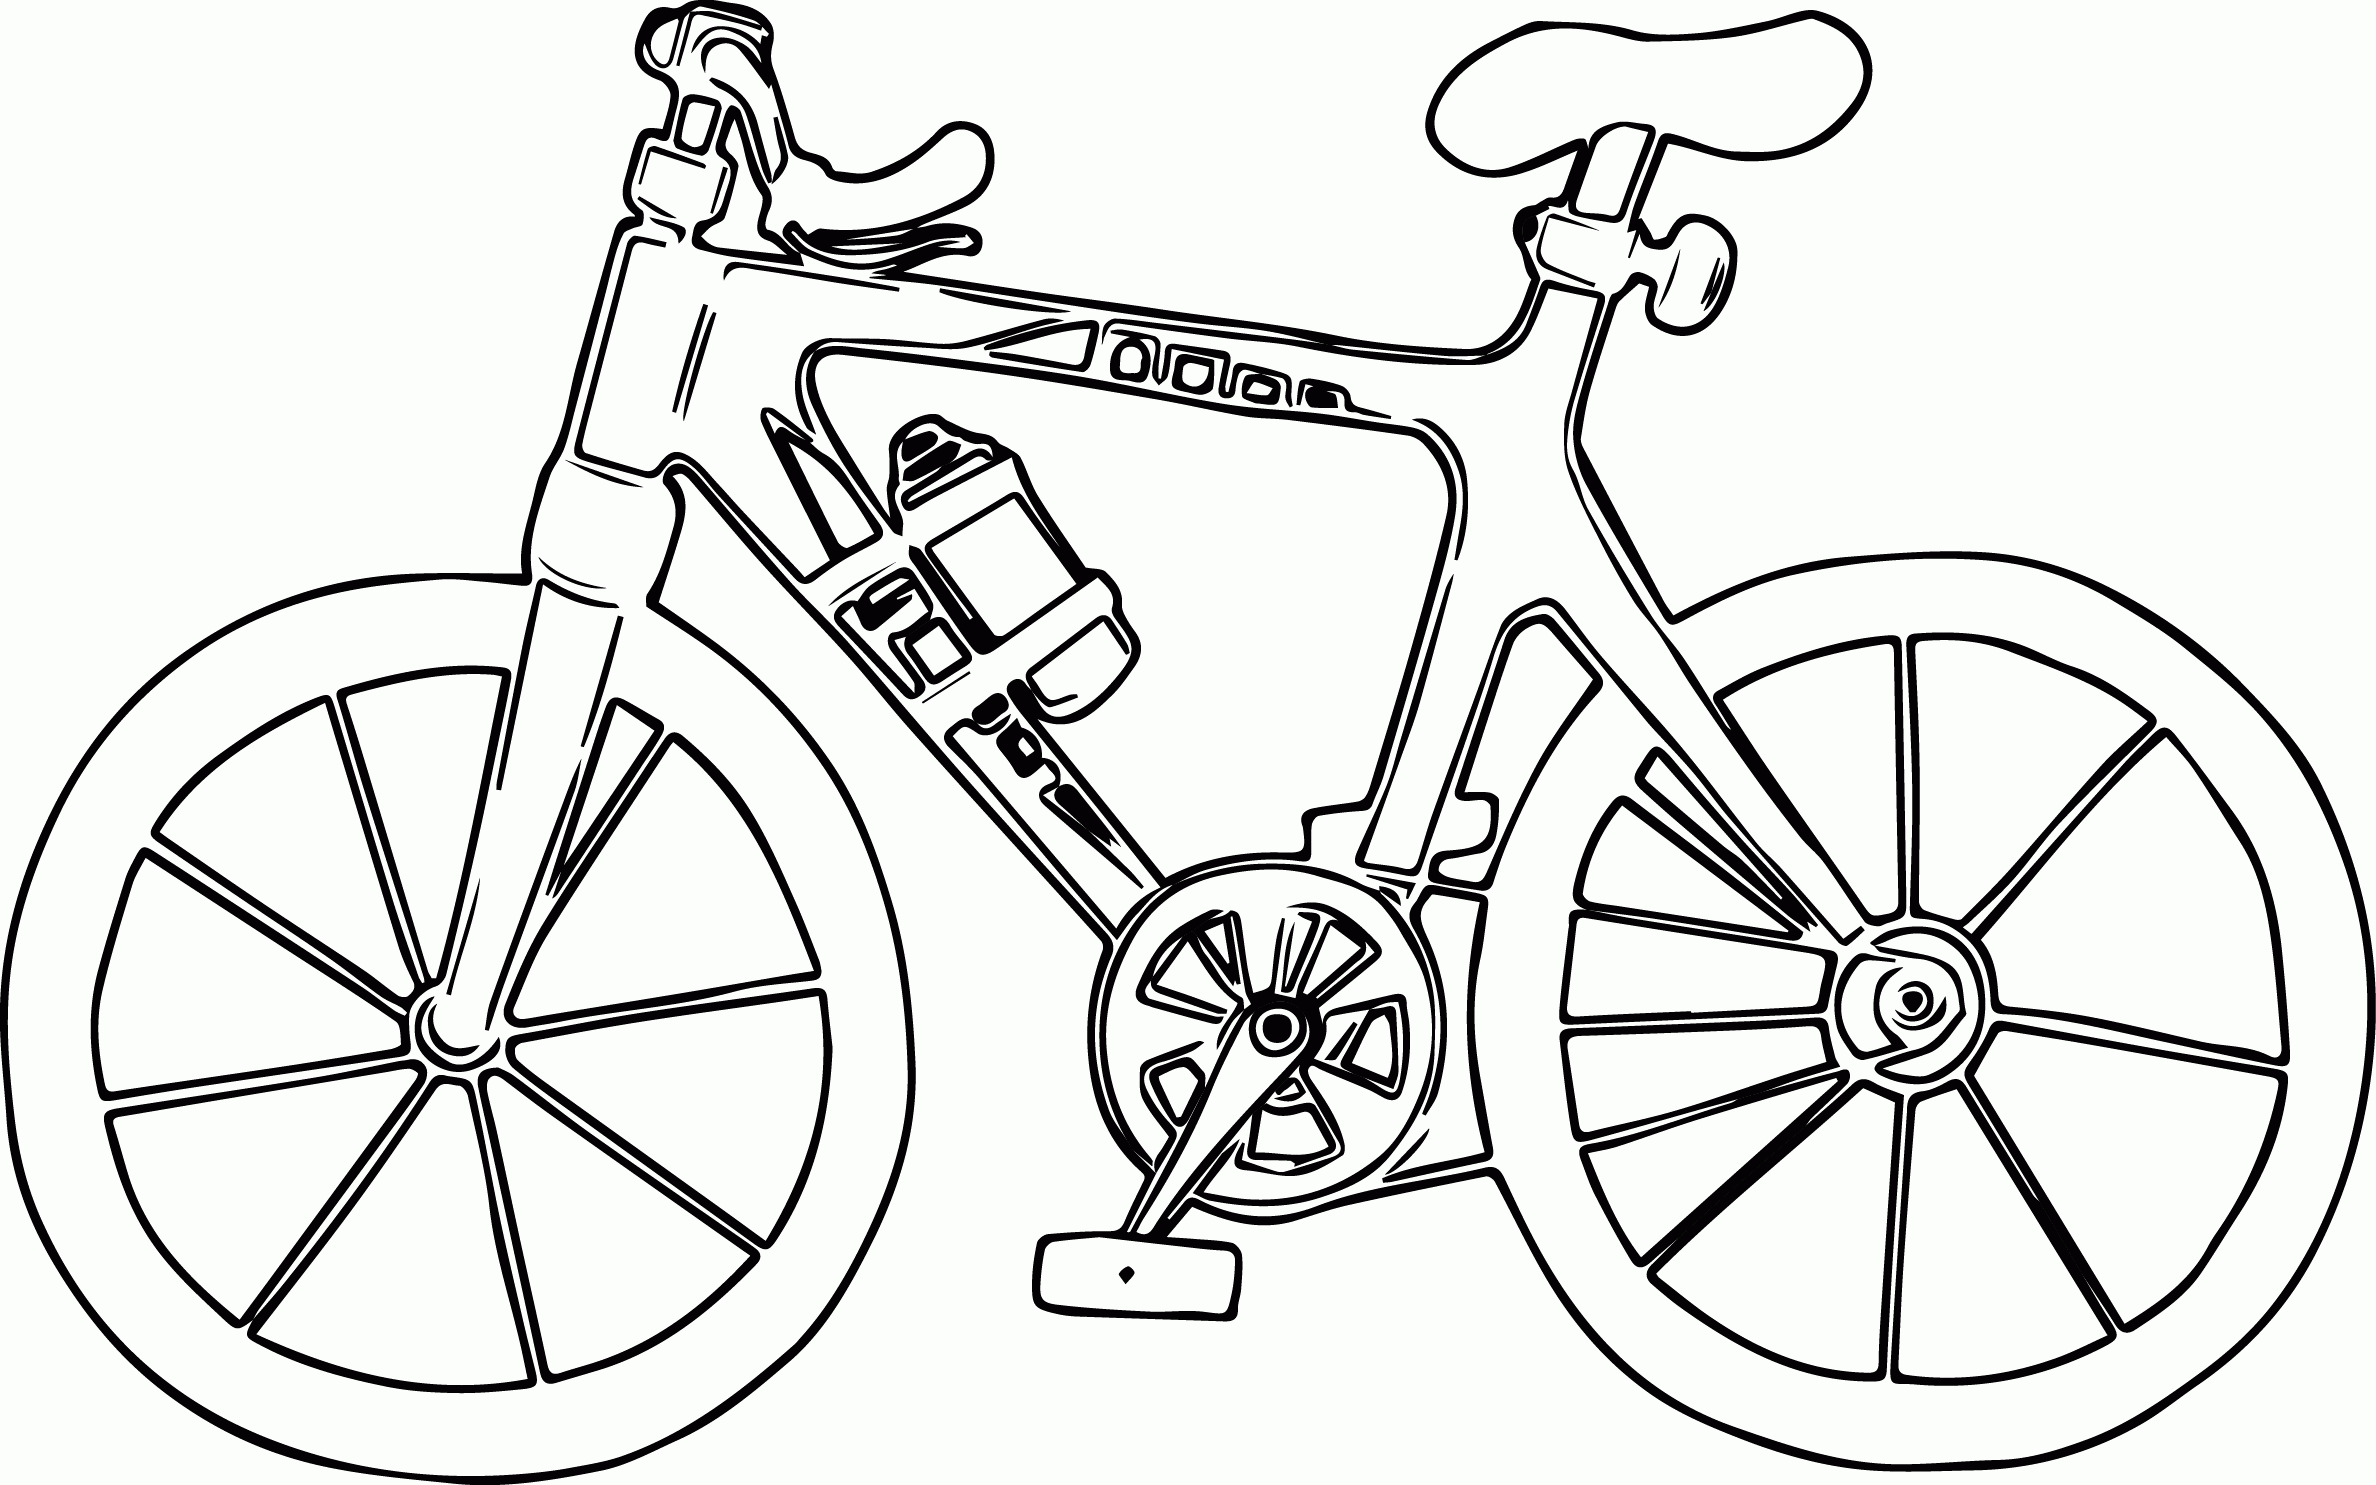 Riding Nice Bike Coloring Page For Everyone For Kids Coloring Page